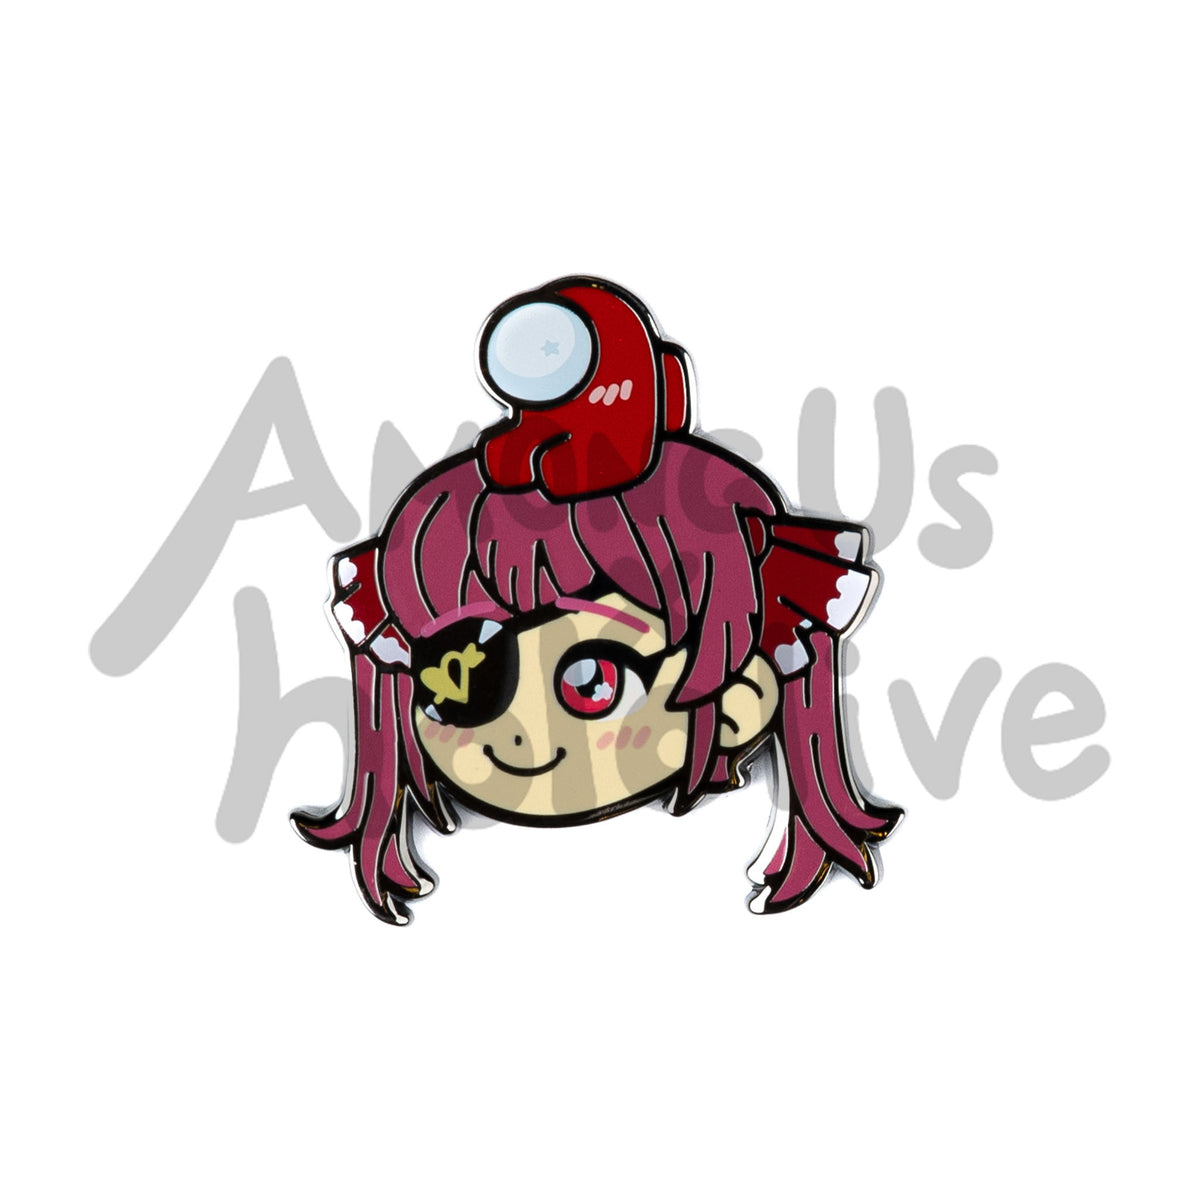 Enamel Pin of Houshou Marine&#39;s Face from Hololive. Marine has fair skin, crismon sparkly eyes, and red hair tied into long pigtails. Her hair ribbons are pleated red and white bows. She wears a black eyepatch with a gold heart and arrow. There&#39;s a Red Crewmate sitting atop her head. Both characters have pink blush marks on their face. 